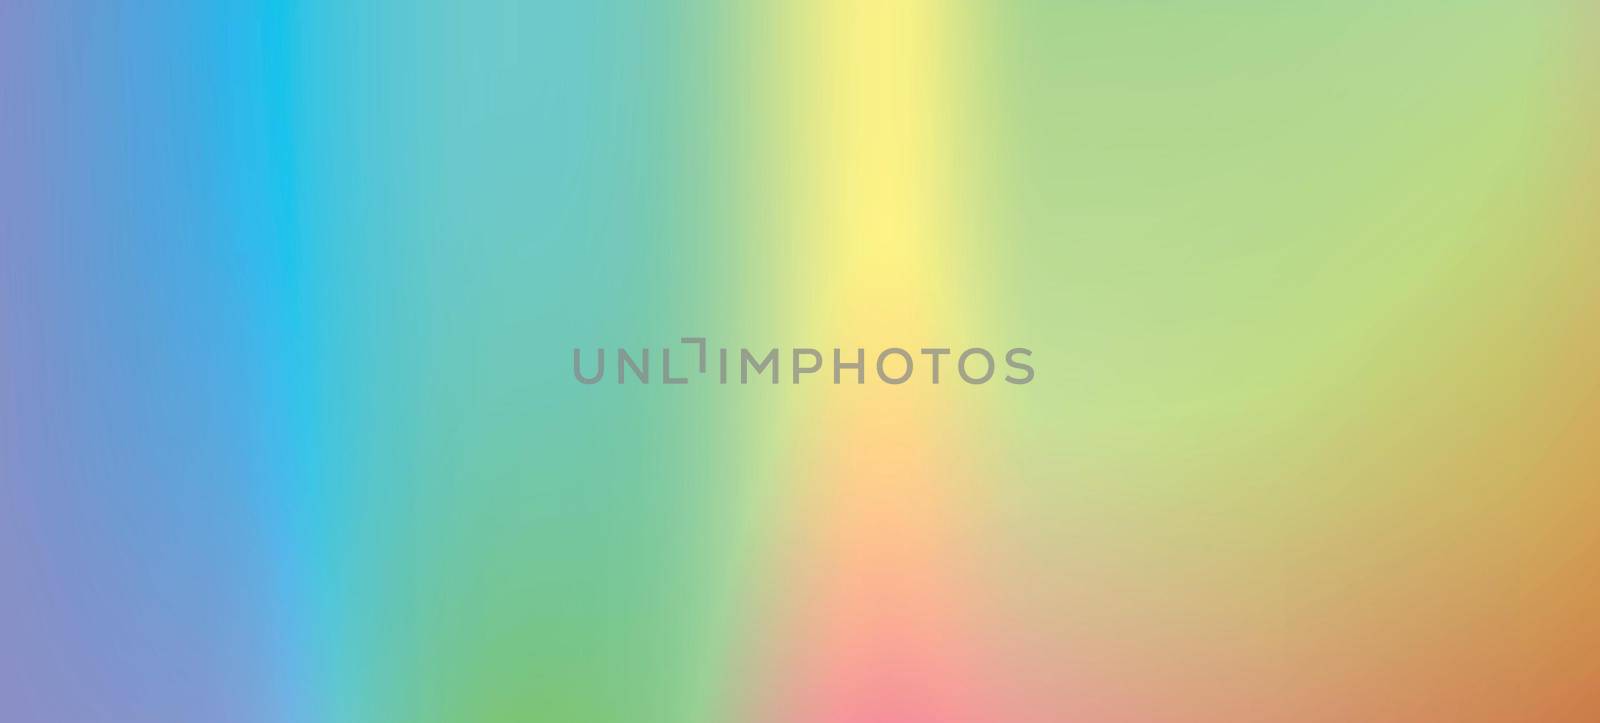 Trendy abstract rainbow blurred background. Smooth watercolor vector illustration for web, template, posters, card, banner. Pastel colors gradient mesh pattern by allaku